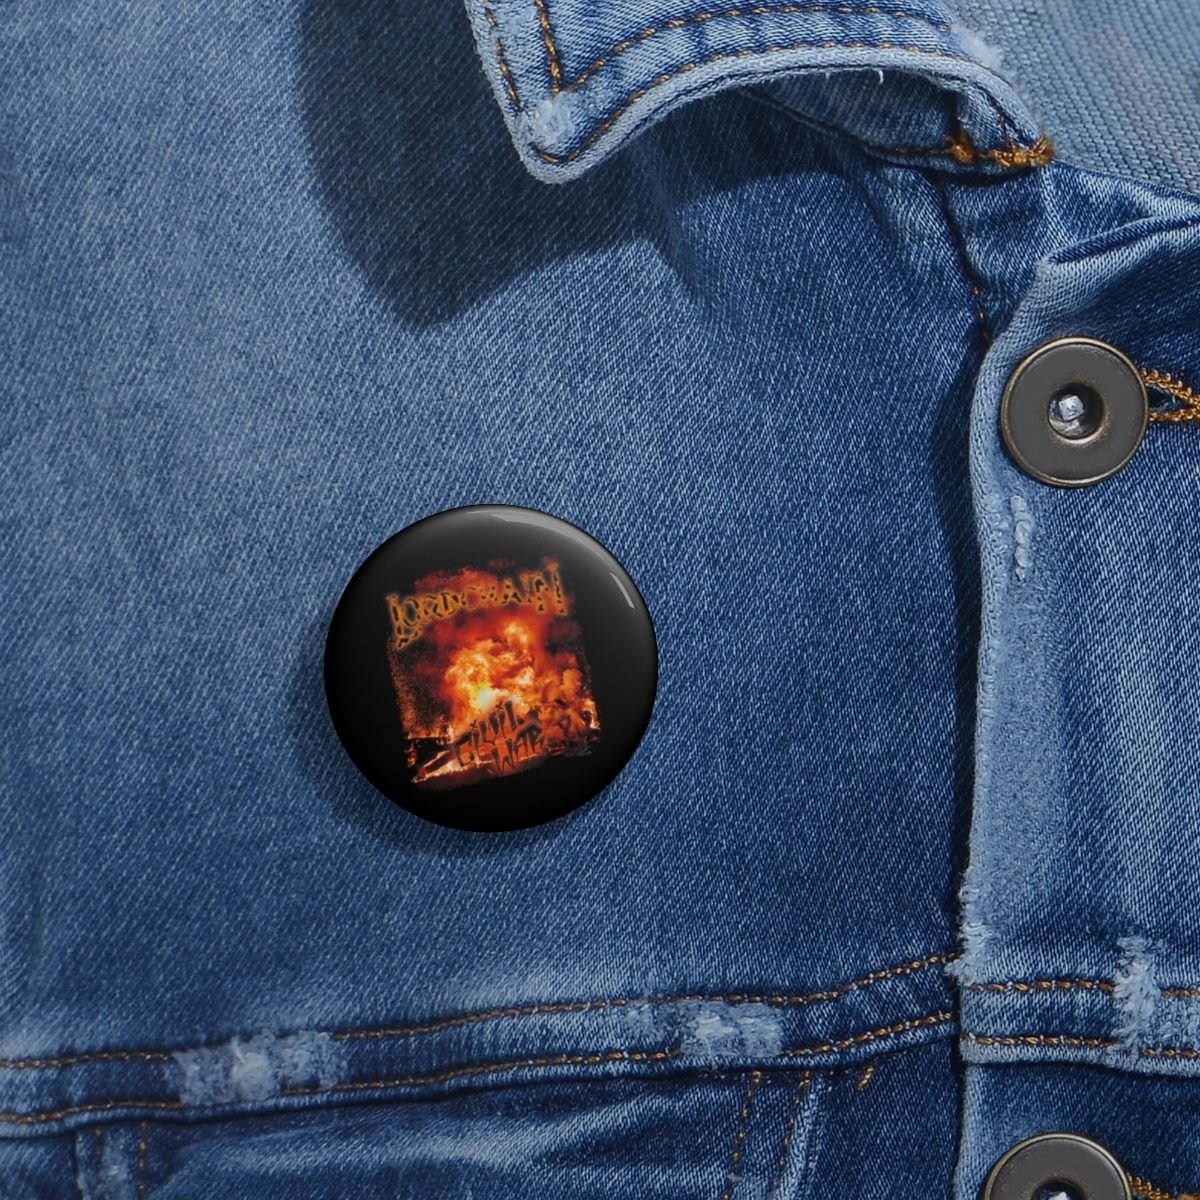 Lordchain – Civil War Pin Buttons